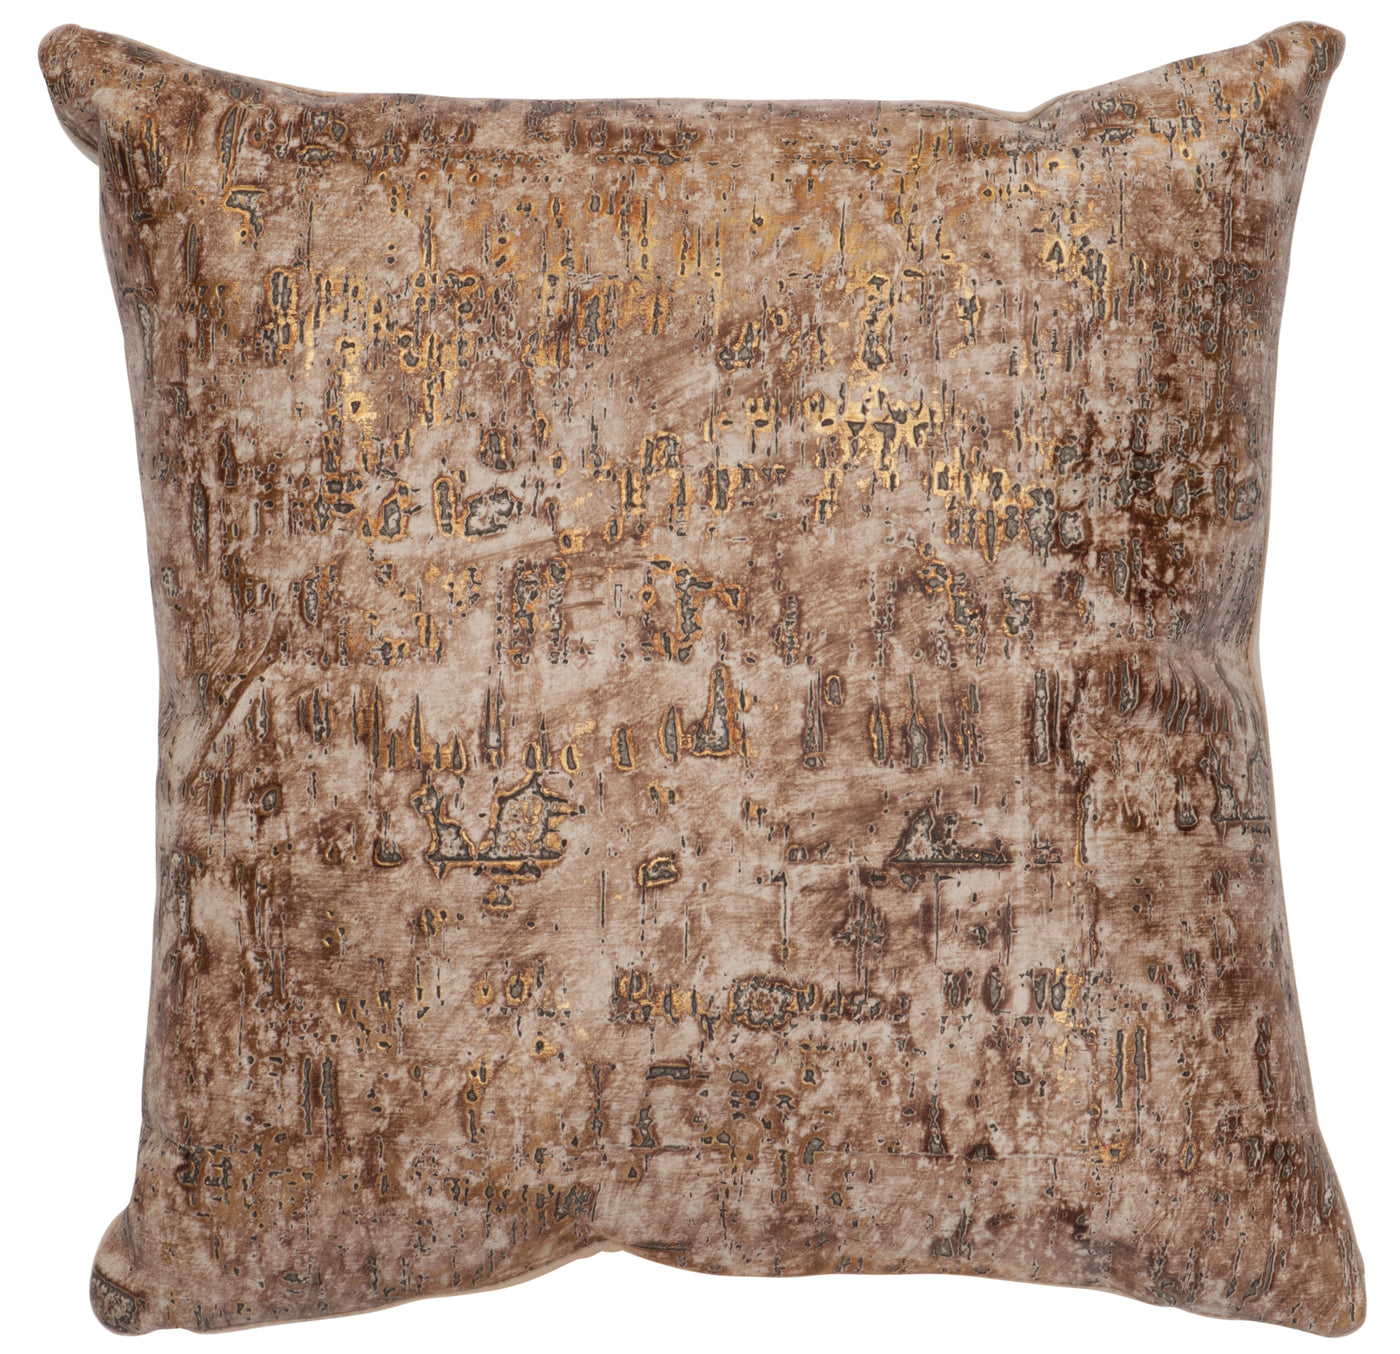 Canvello Speckled Light Brown Leather Pillow - Leather Back - 12"x18"